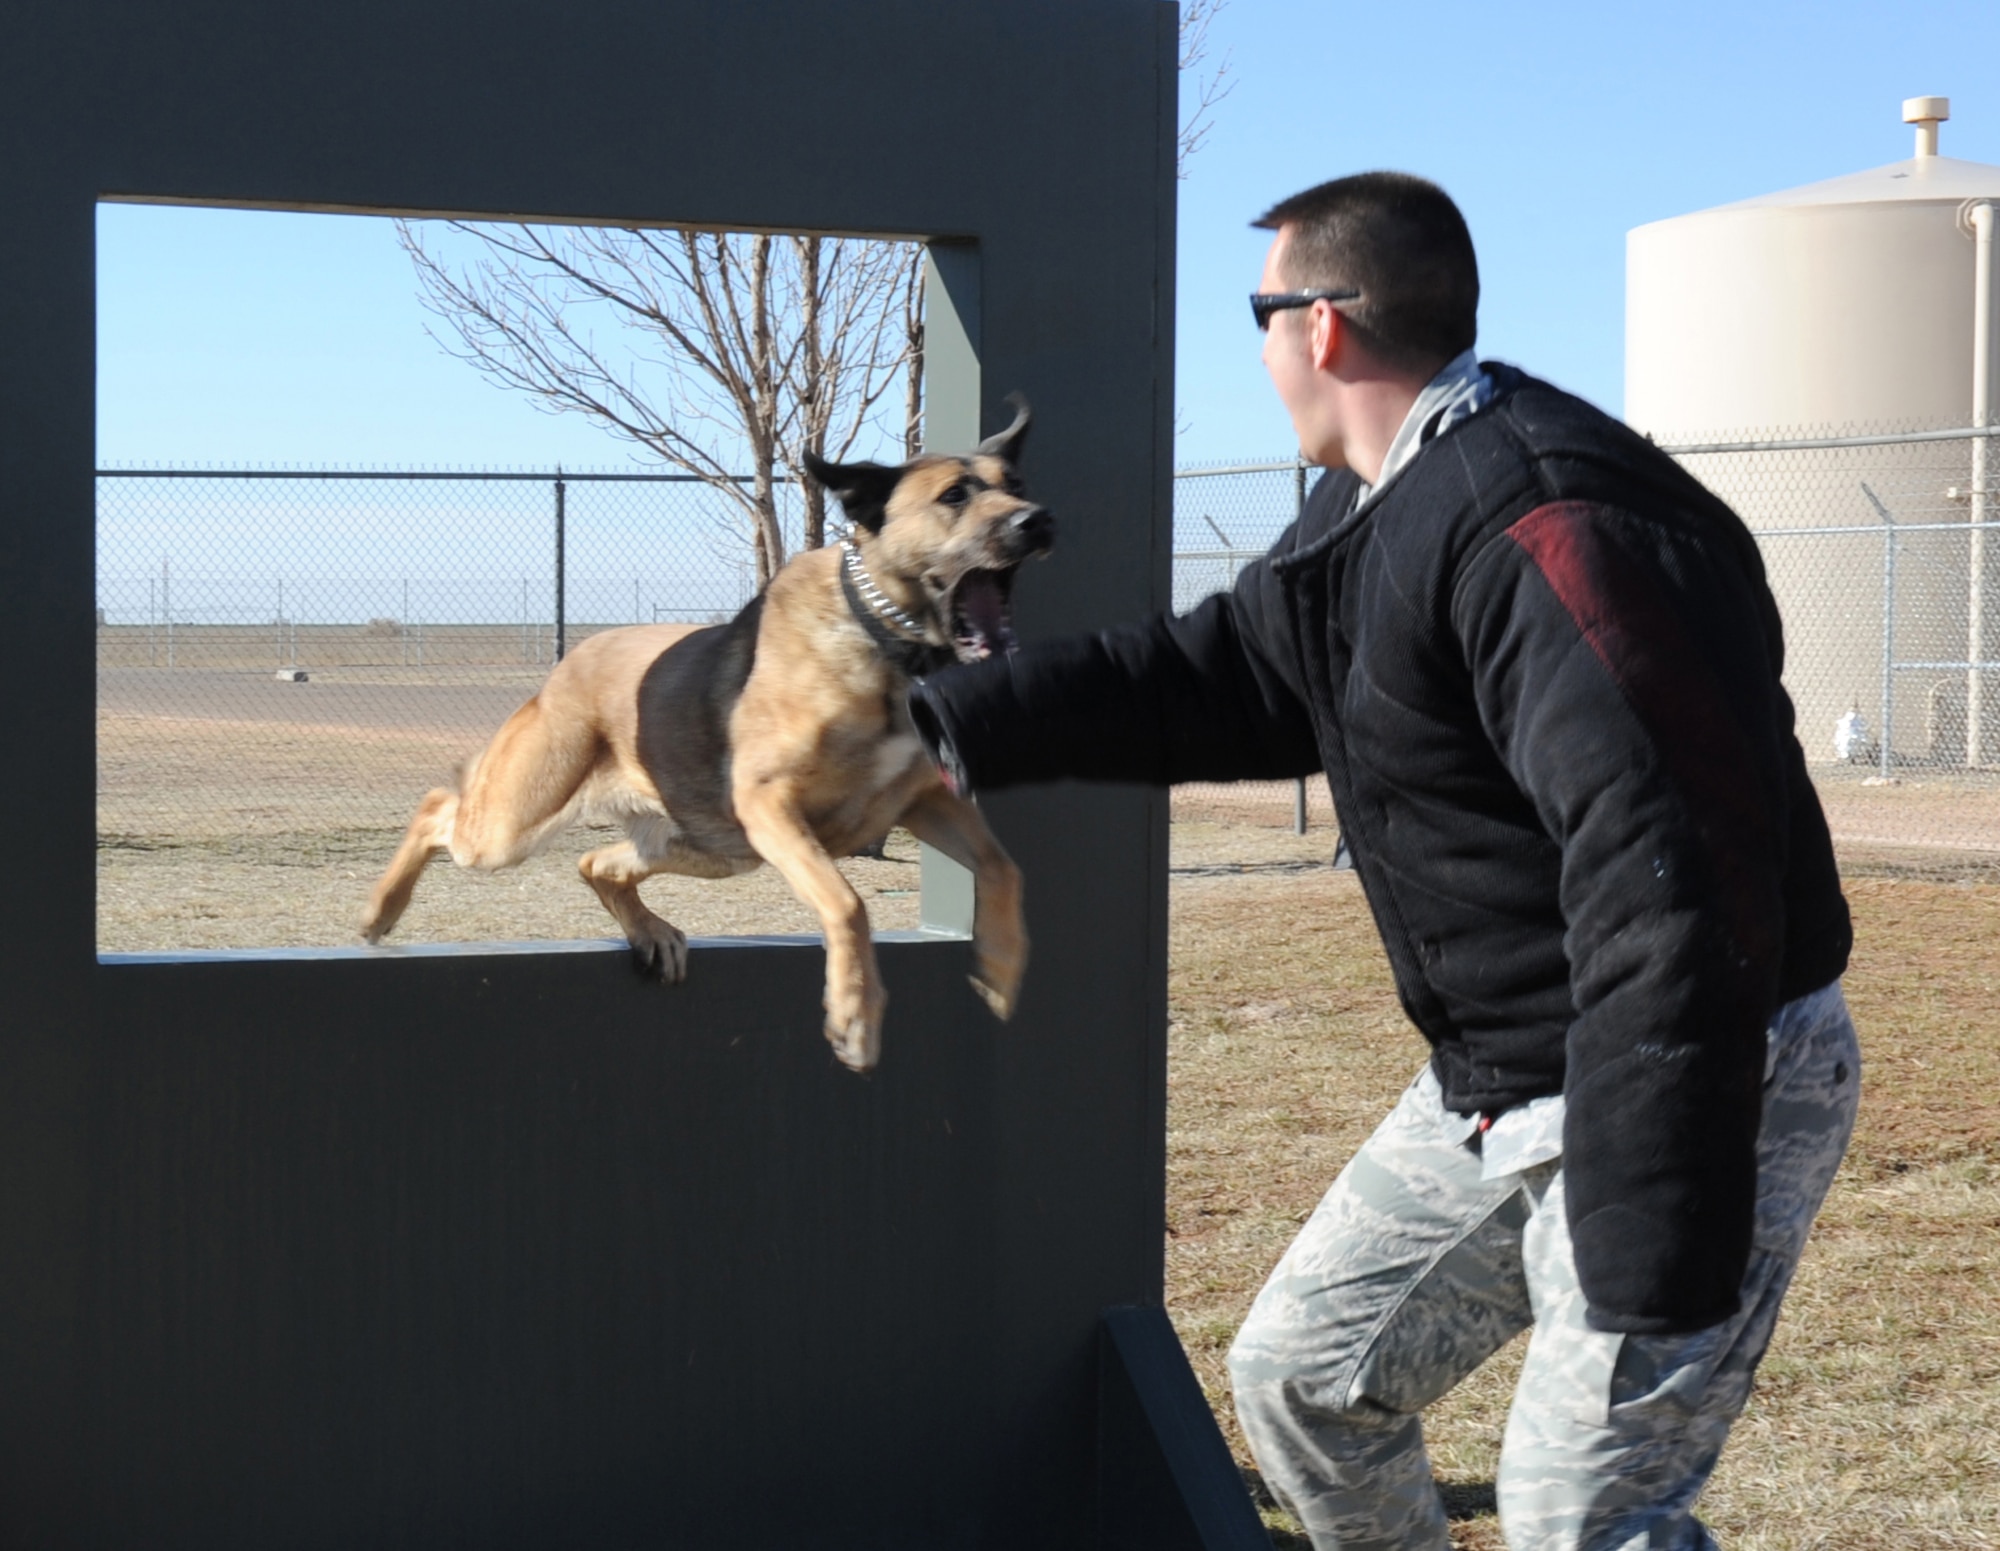 U.S. Air Force Staff Sgt. Kenneth Holt, 27th Special Operations Security Forces Squadron military working dog handler, practices suspect take-down bite drills with K-9 unit Ben K326 at an obstacle course for MWDs at Cannon Air Force Base, N.M., March 15, 2012. All K-9 units assigned to Cannon are dual purpose patrol and detections canines responsible for protecting base personnel and resources. (U.S. Air Force photo by Airman 1st Class Alexxis Pons Abascal) 